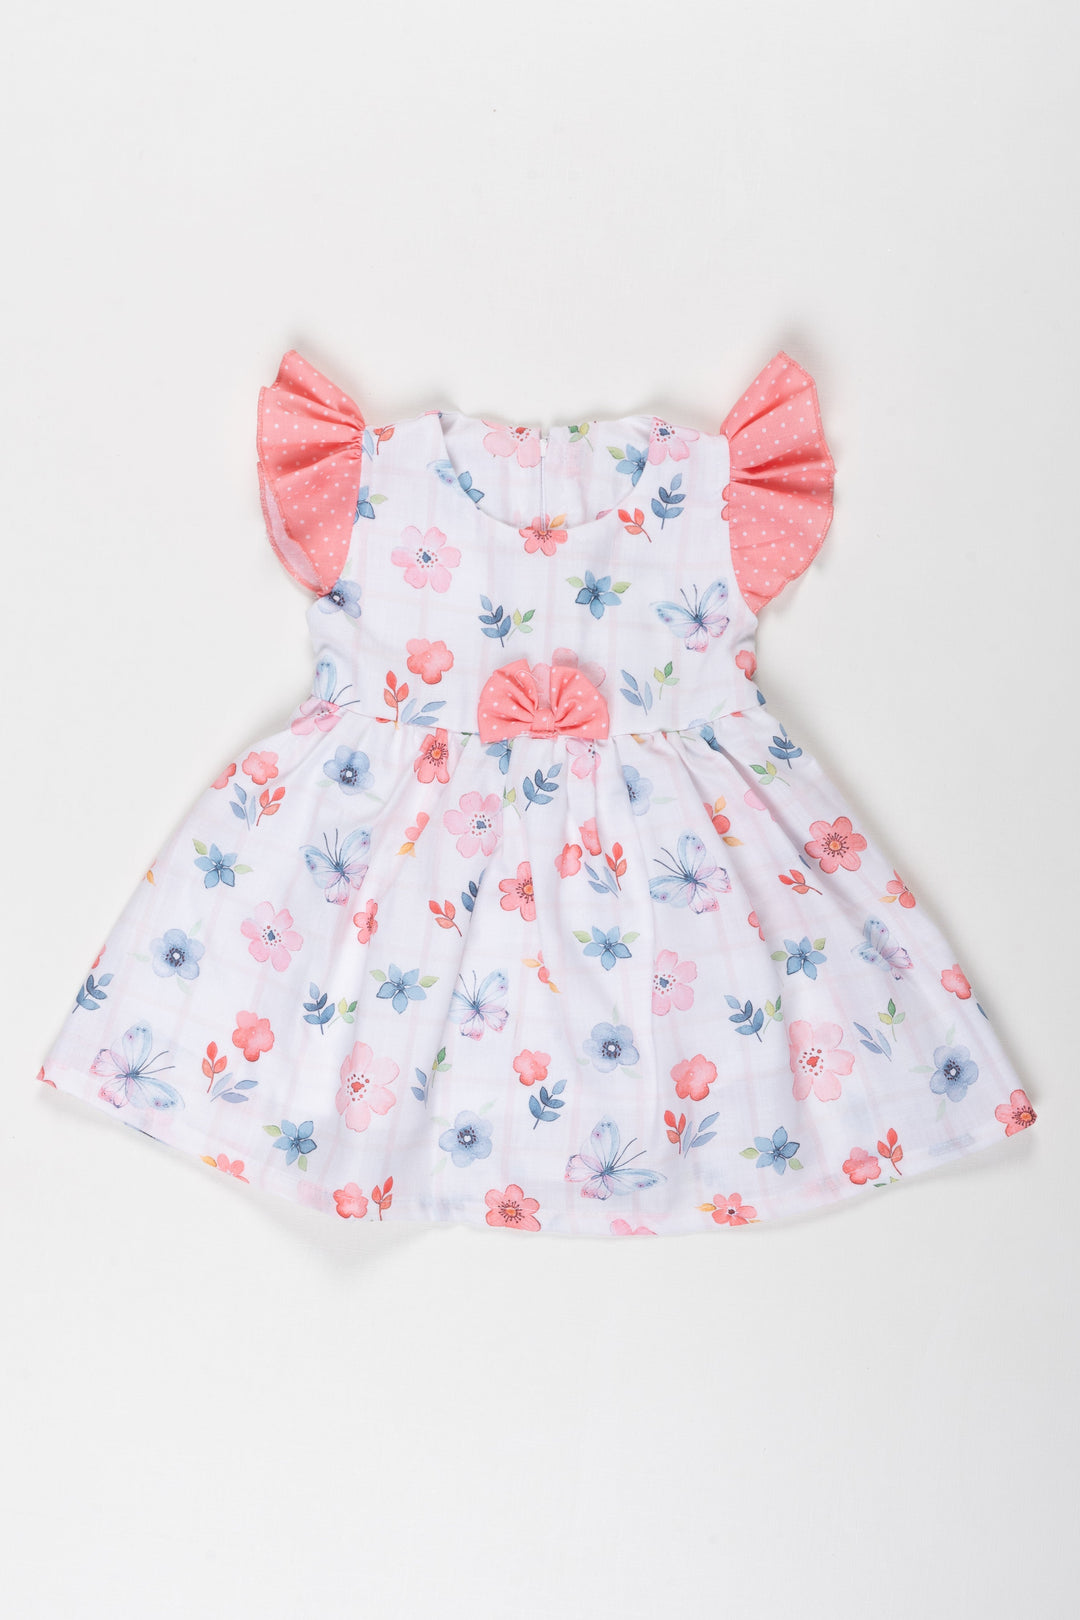 The Nesavu Baby Cotton Frocks Playful Petals Baby Girl Frock - Flutter Sleeves and Floral Charm Nesavu 14 (6M) / Salmon / Cotton BFJ544B-14 Playful Petals Baby Girl Frock | Flutter Sleeves and Floral Charm | The Nesavu